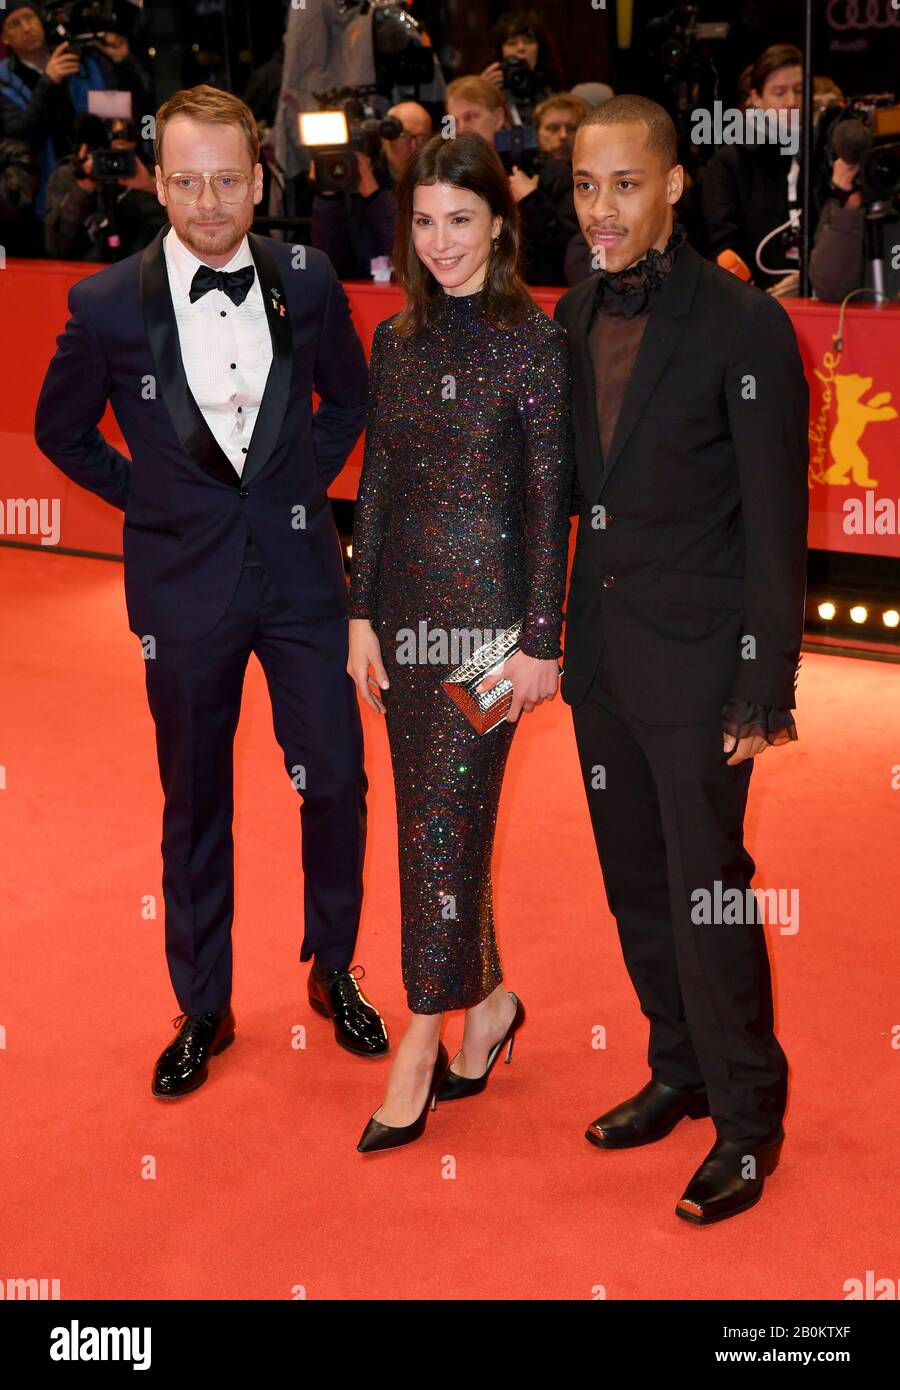 Berlin, Germany. 20th Feb, 2020. 70th Berlinale, opening gala: Actor Jerry Hoffmann (r), actress Aylin Tezel (M) and actor Stefan Konarske (l) at the opening ceremony of the International Film Festival. The Berlinale opens with the film 'My Salinger Year'. Credit: Jörg Carstensen/dpa/Alamy Live News Stock Photo